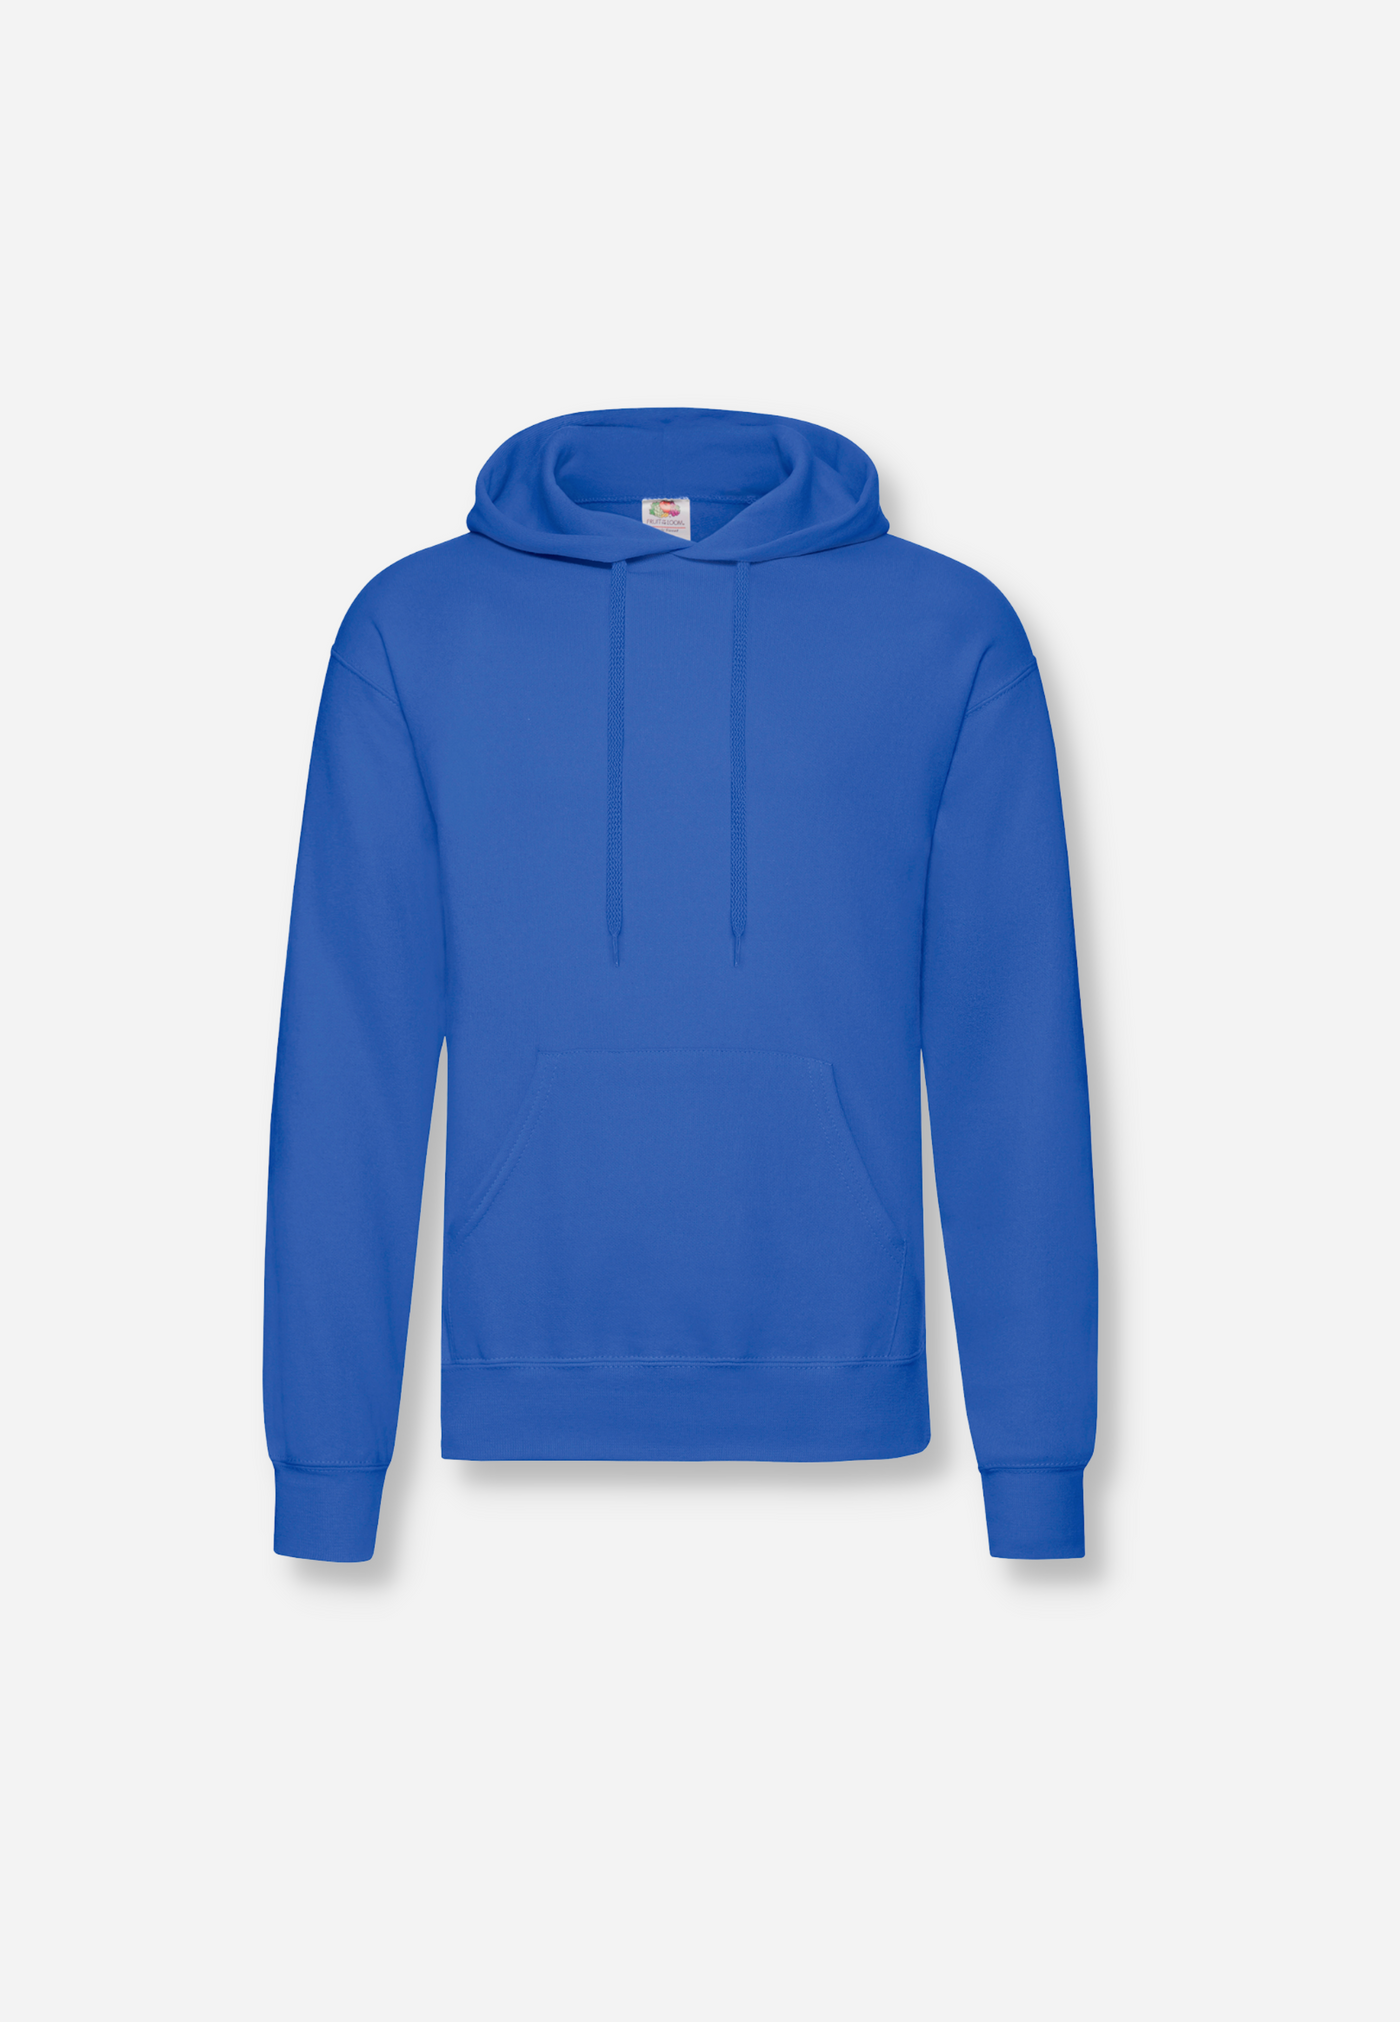 CLASSIC HOODED - ROYAL BLUE